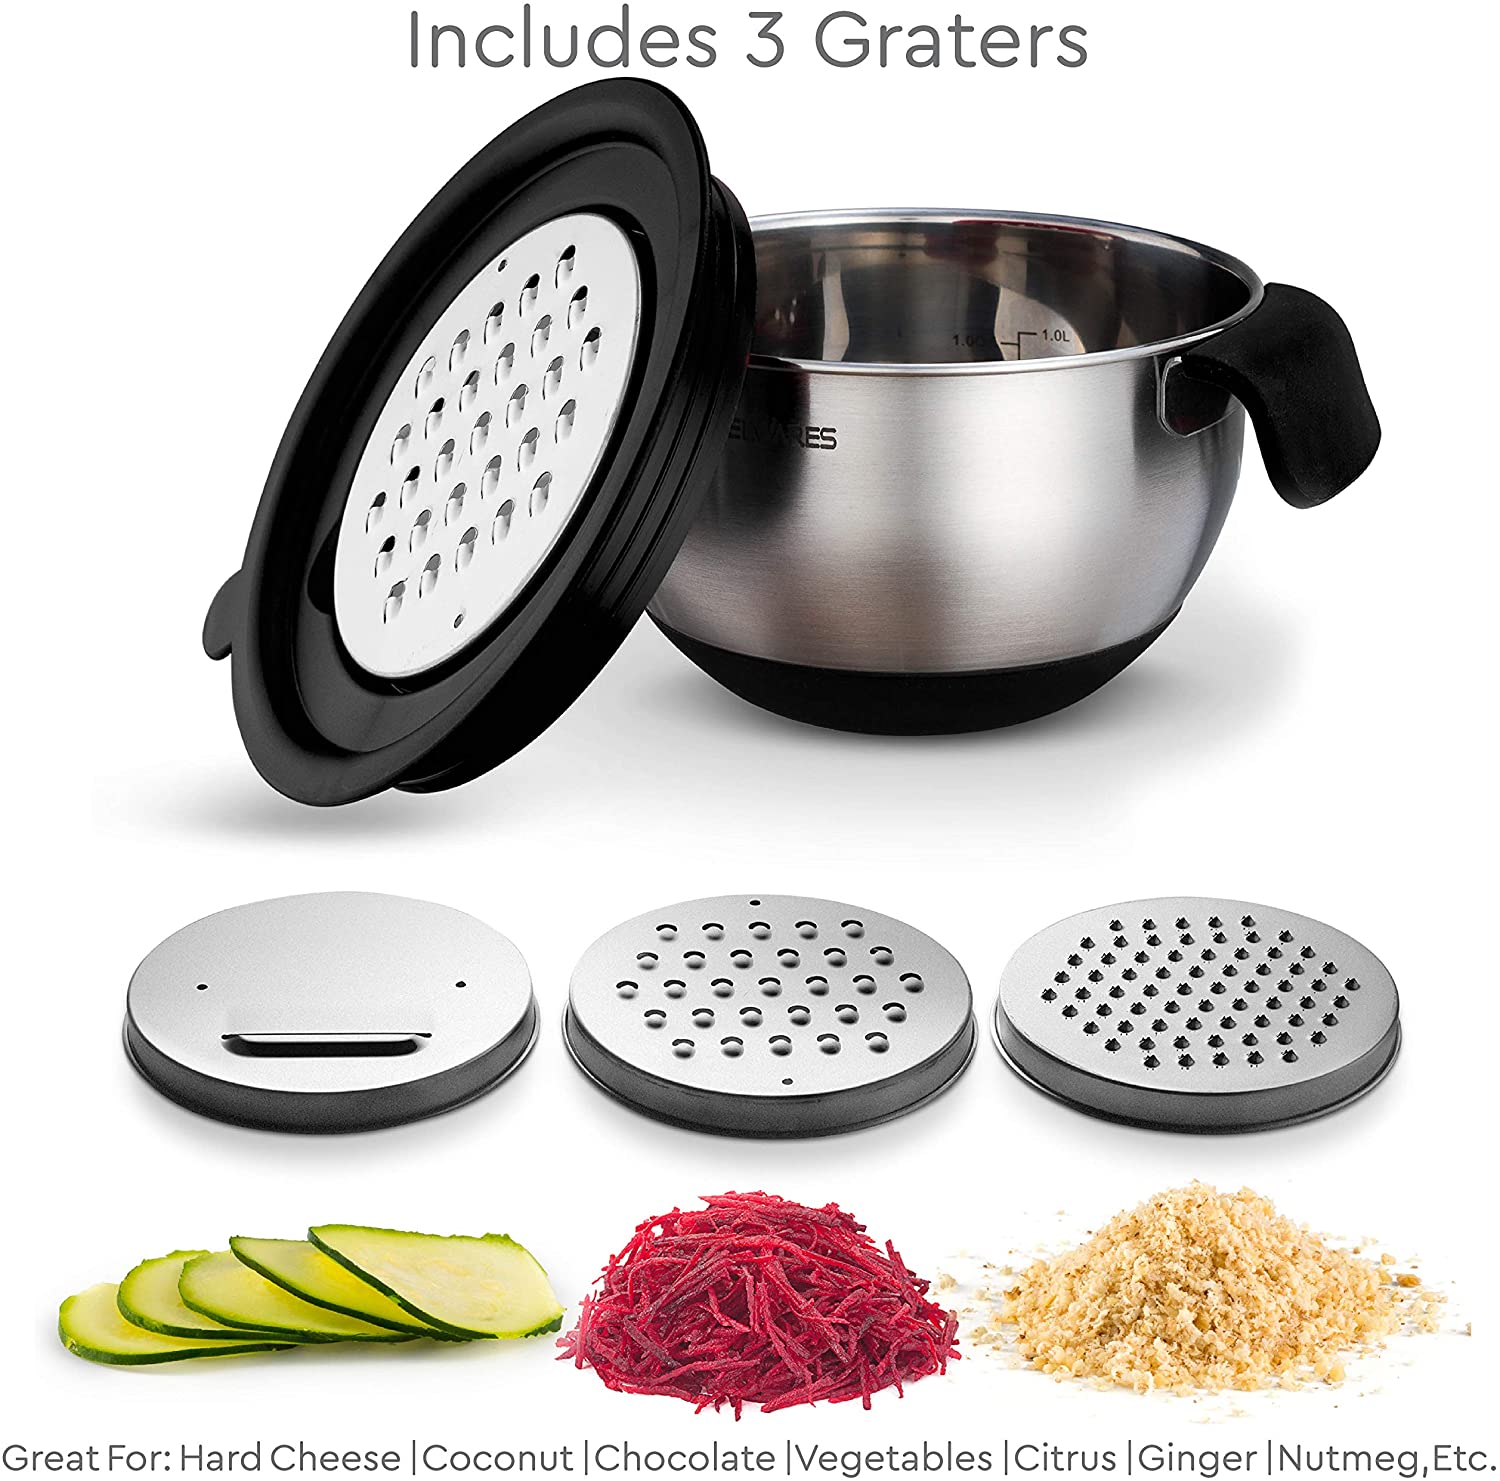  E-far Mixing Bowls with Lids Set of 5, Stainless Steel Mixing  Bowls Metal Nesting Bowls with Airtight Lids, Non-toxic & Dishwasher Safe,  Great for Cooking, Baking, Serving - Size 0.7/1/1.5/3/4.5QT: Home